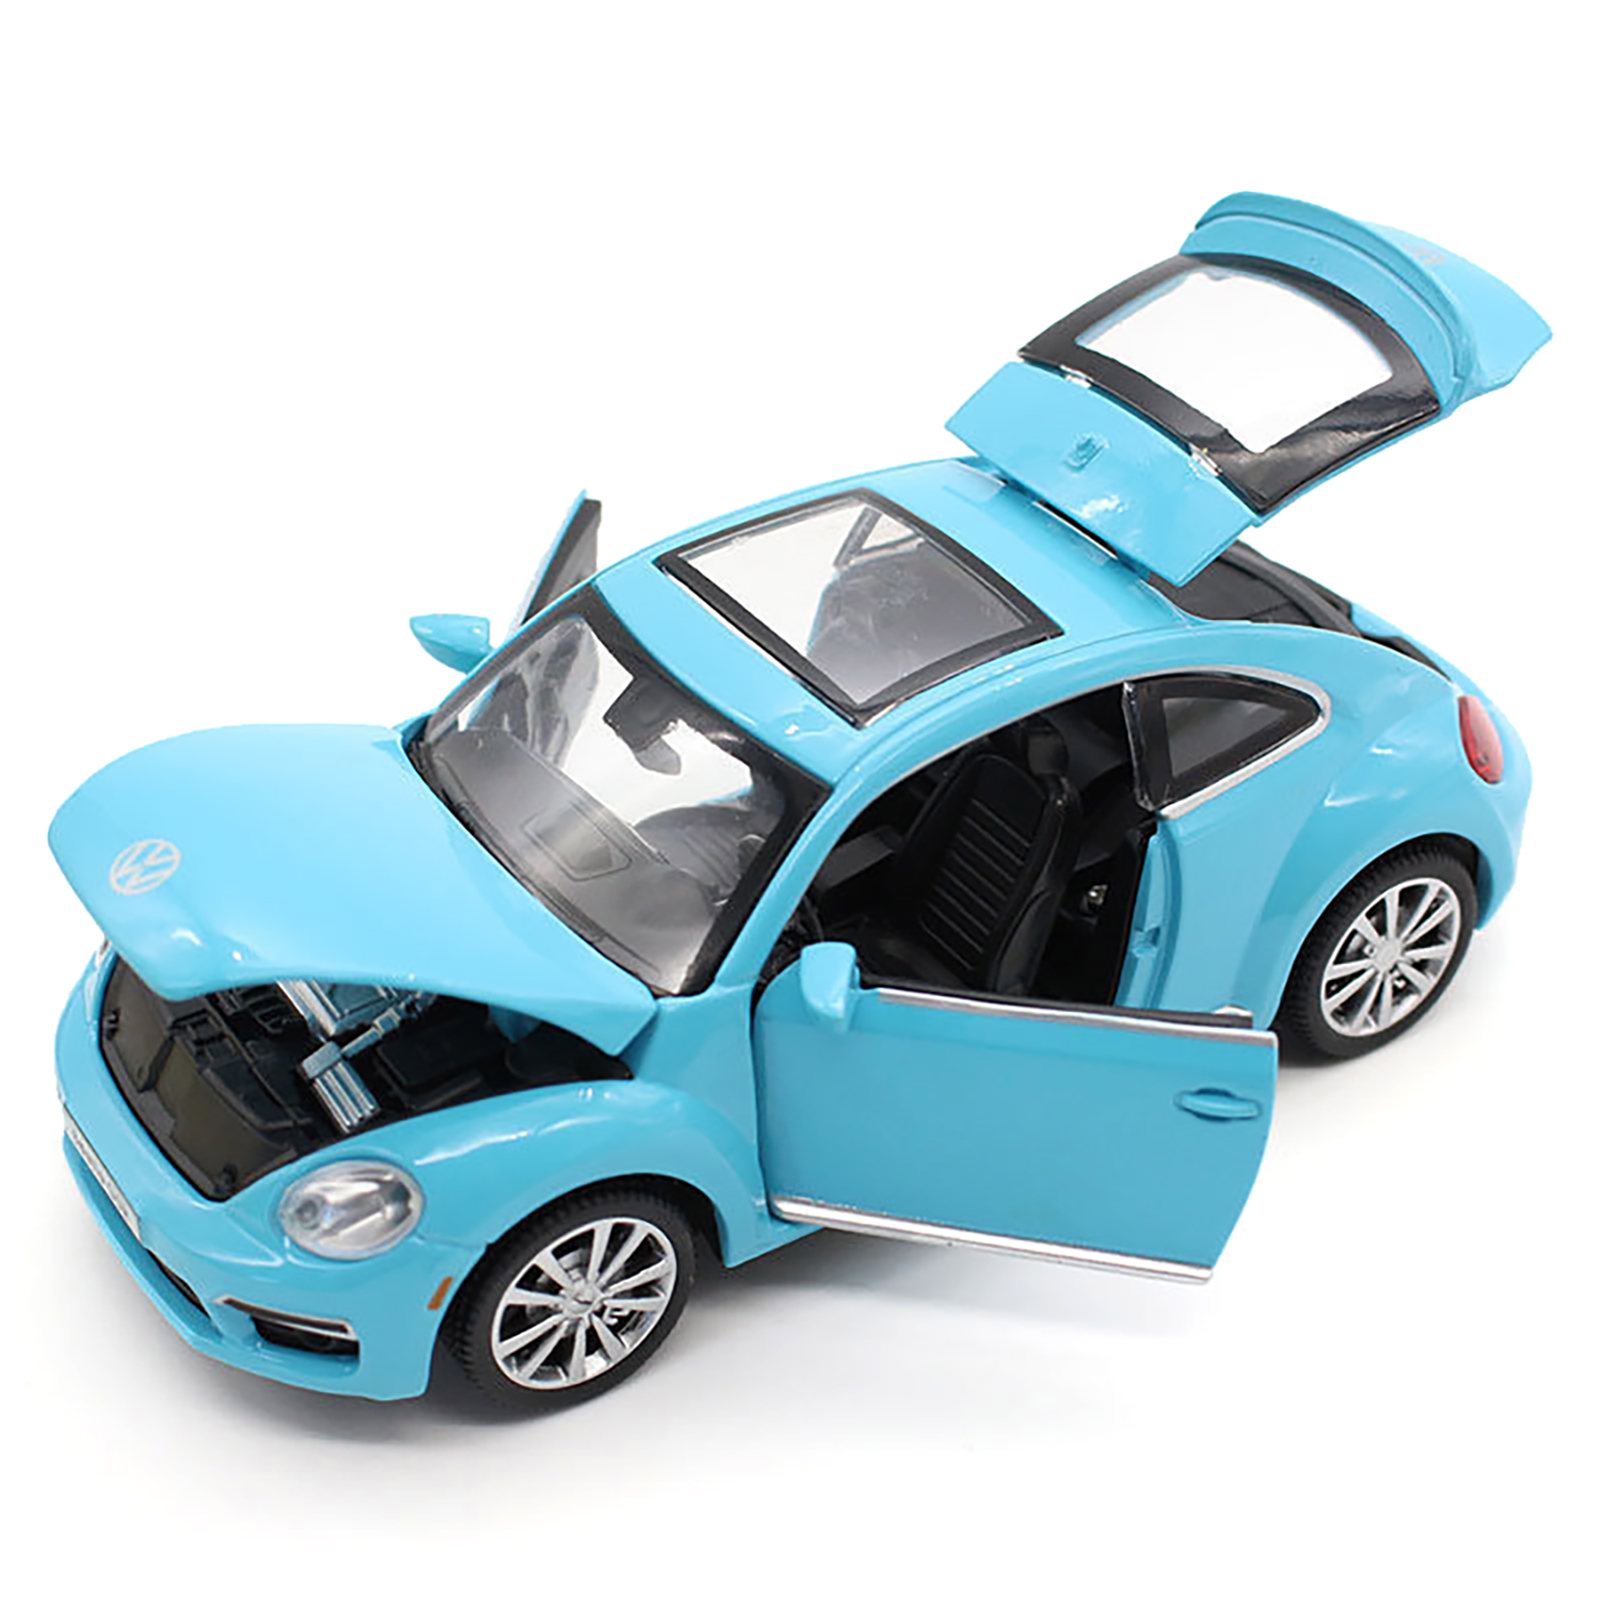 1:32 Simulation Alloy Car Model With Base Die-cast Pull-back Vehicle With Light Sound Openable Door Christmas Gifts For Boys Girls